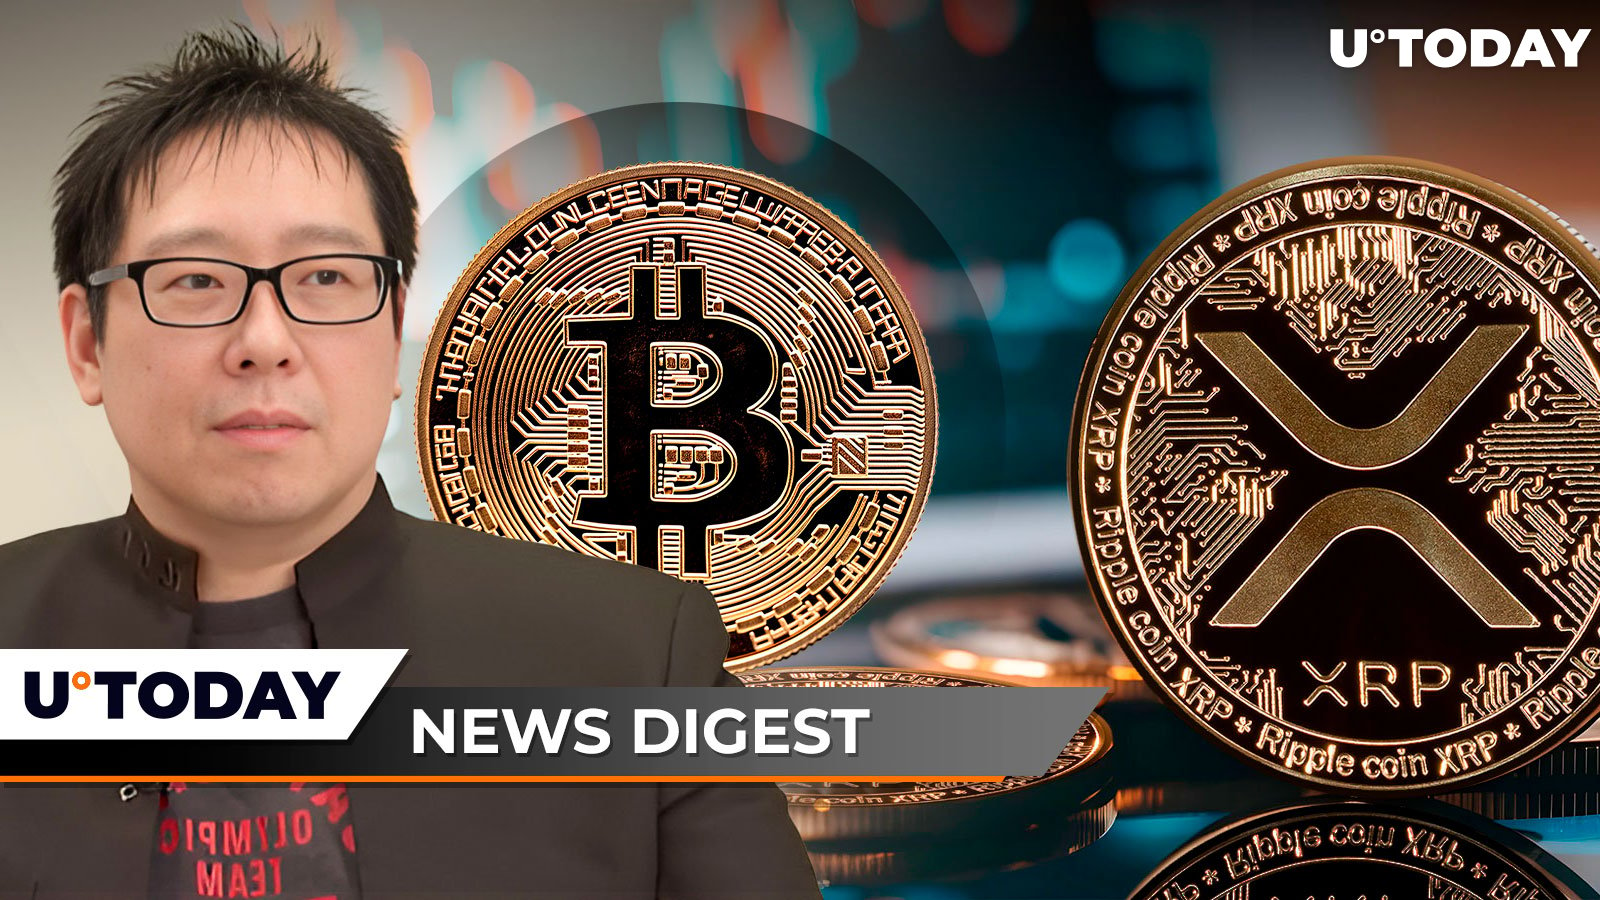 3.6 Billion XRP in 24 Hours, Samson Mow Expects ‘Super Bullish Bitcoin News’ Soon, Ethereum ETFs Witness Massive Outflows: Crypto News Digest by U.Today